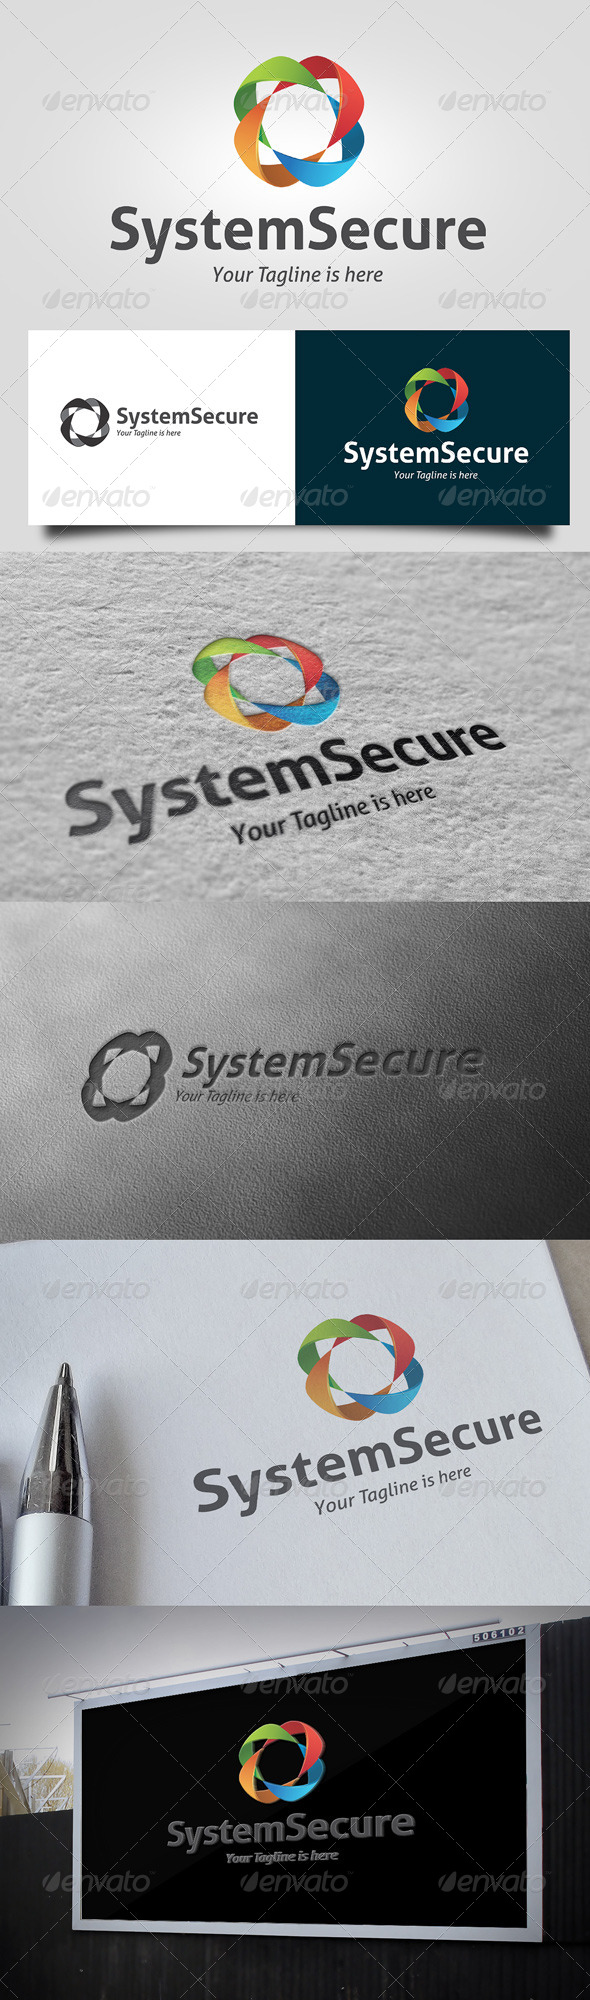 System Secure Logo (Abstract)